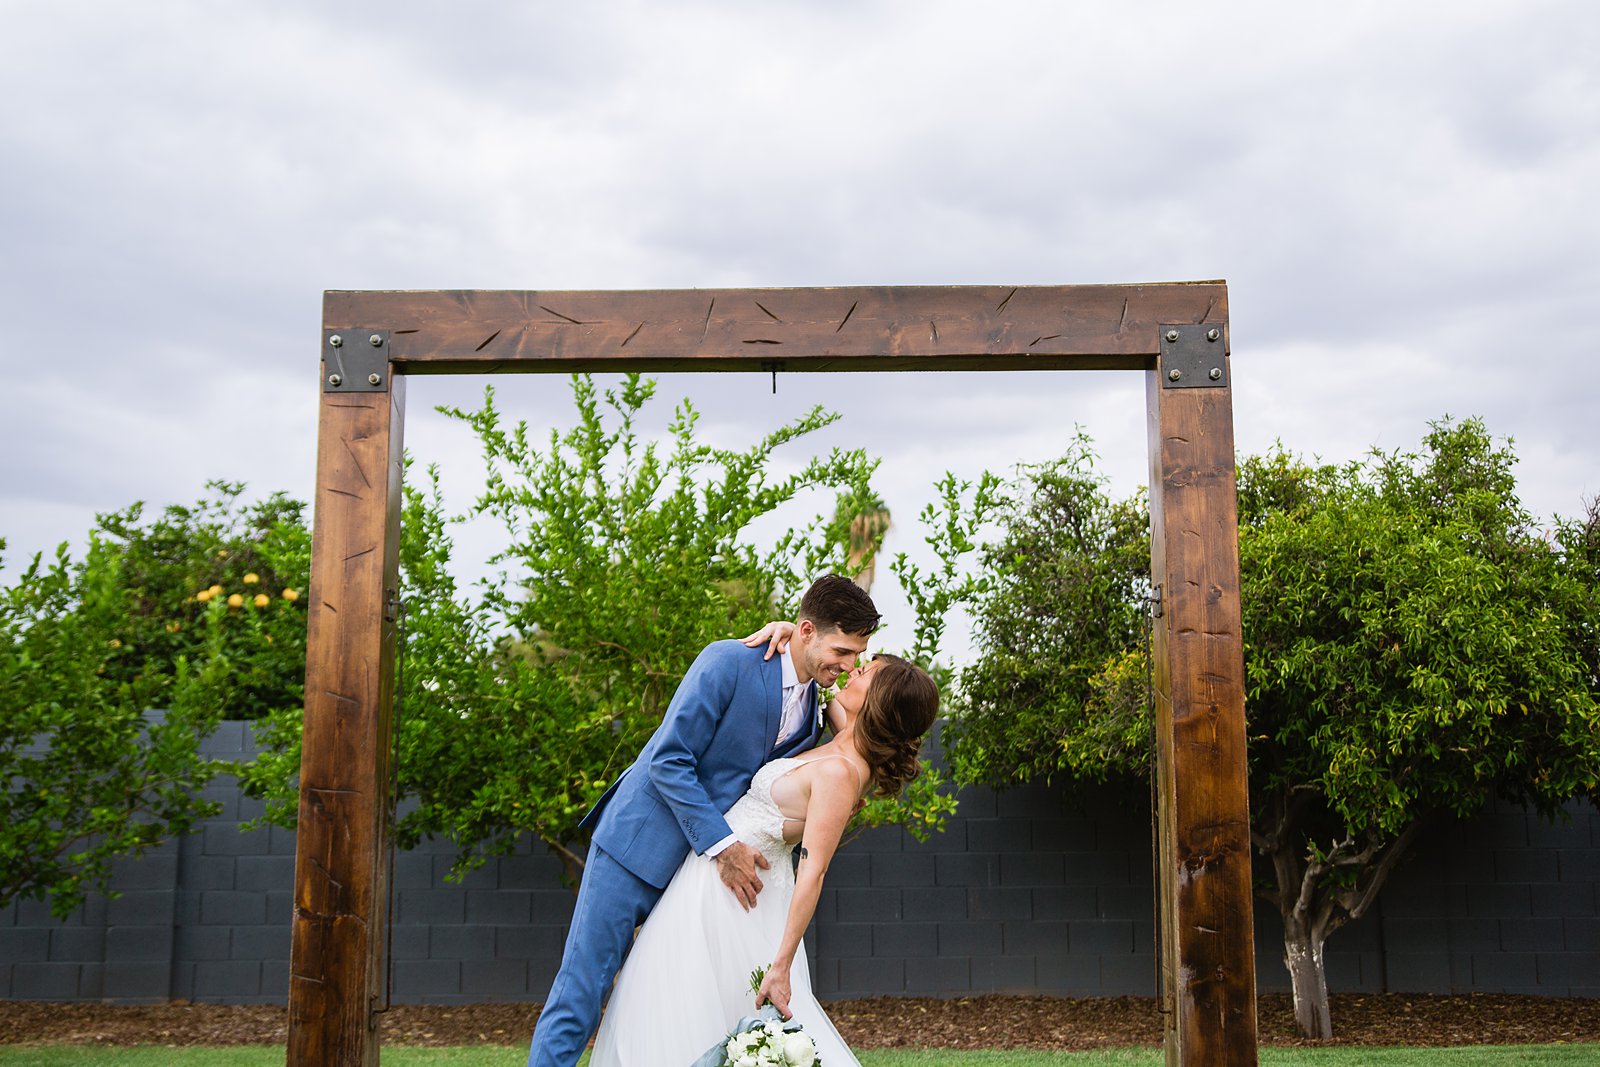 Bride and groom share a kiss under a rustic alter at Gather Estate wedding venue by Arizona wedding photographer PMA Photography.